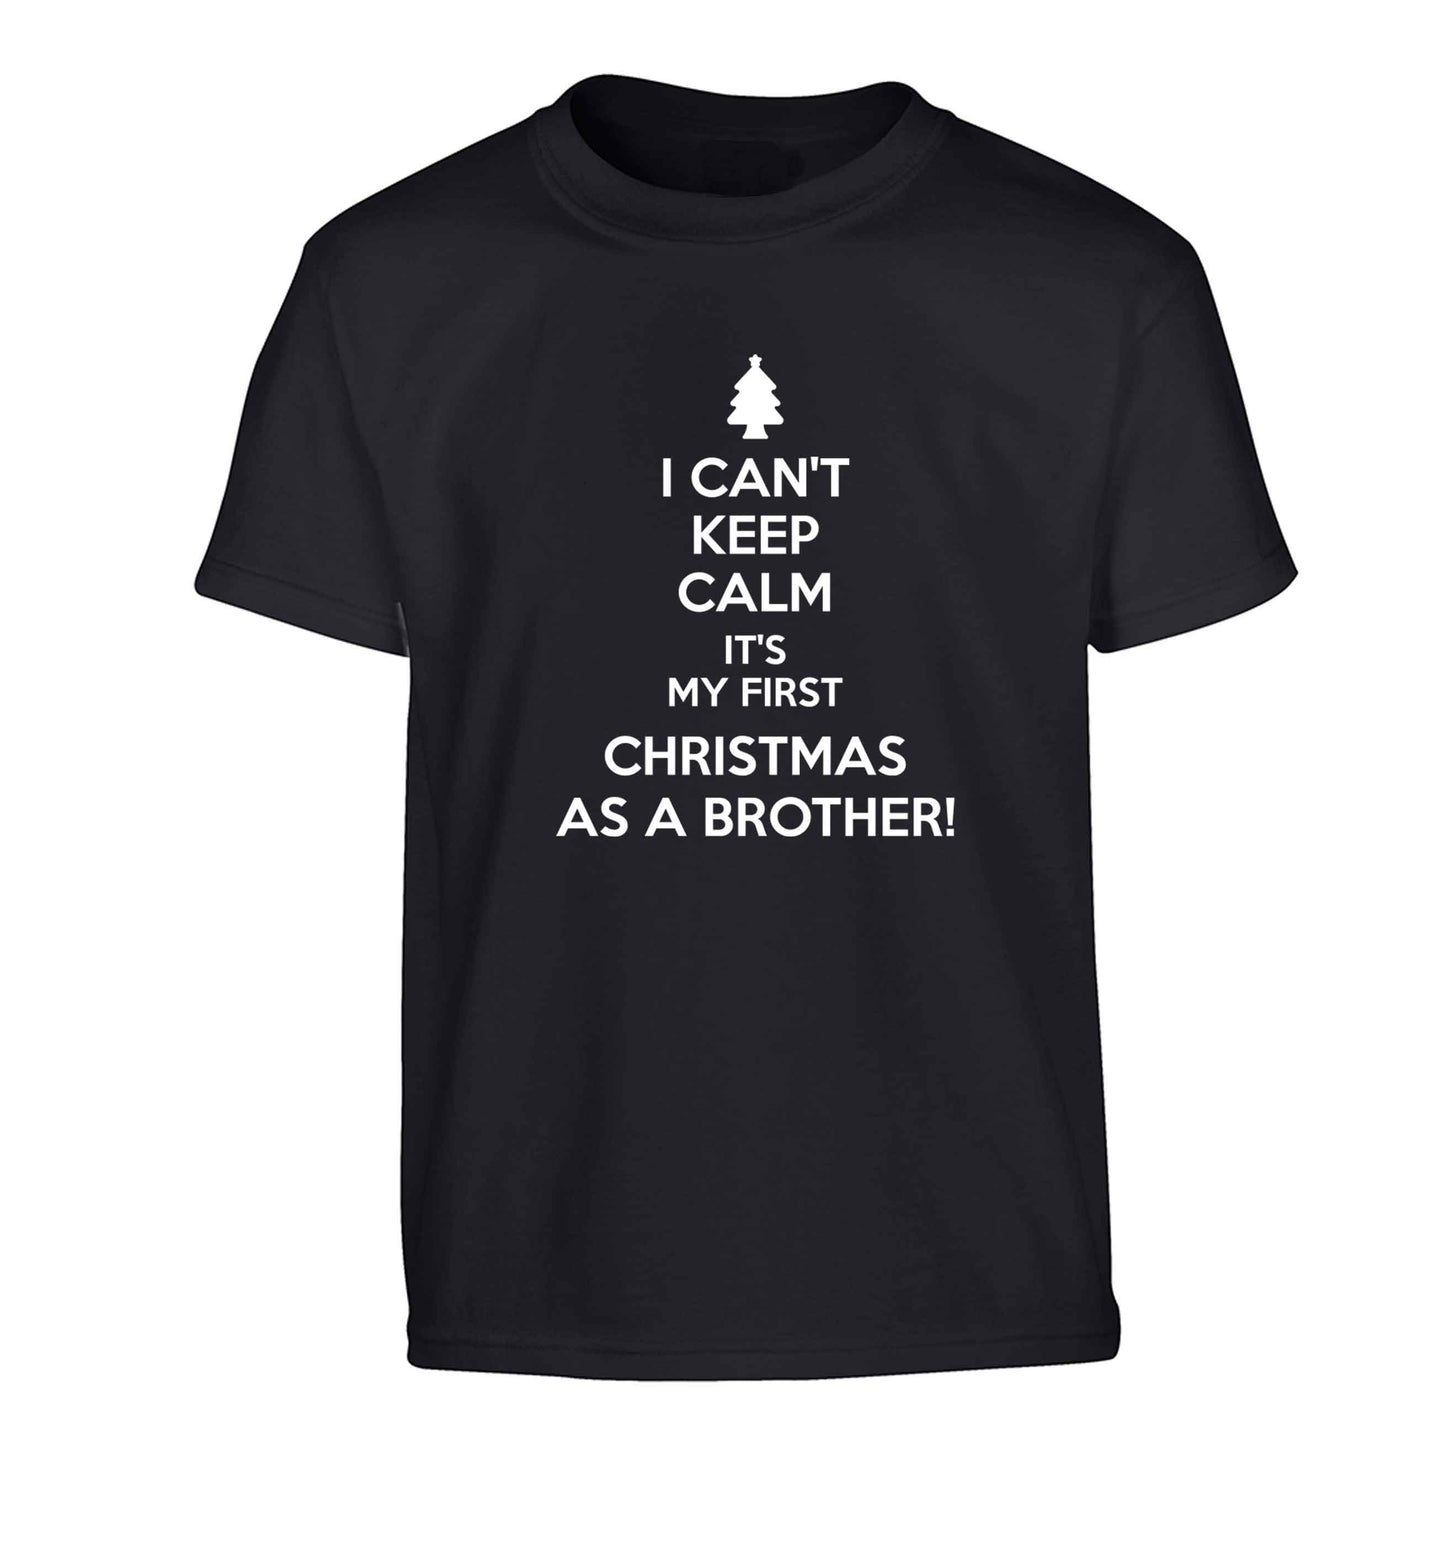 I can't keep calm it's my first Christmas as a brother! Children's black Tshirt 12-13 Years